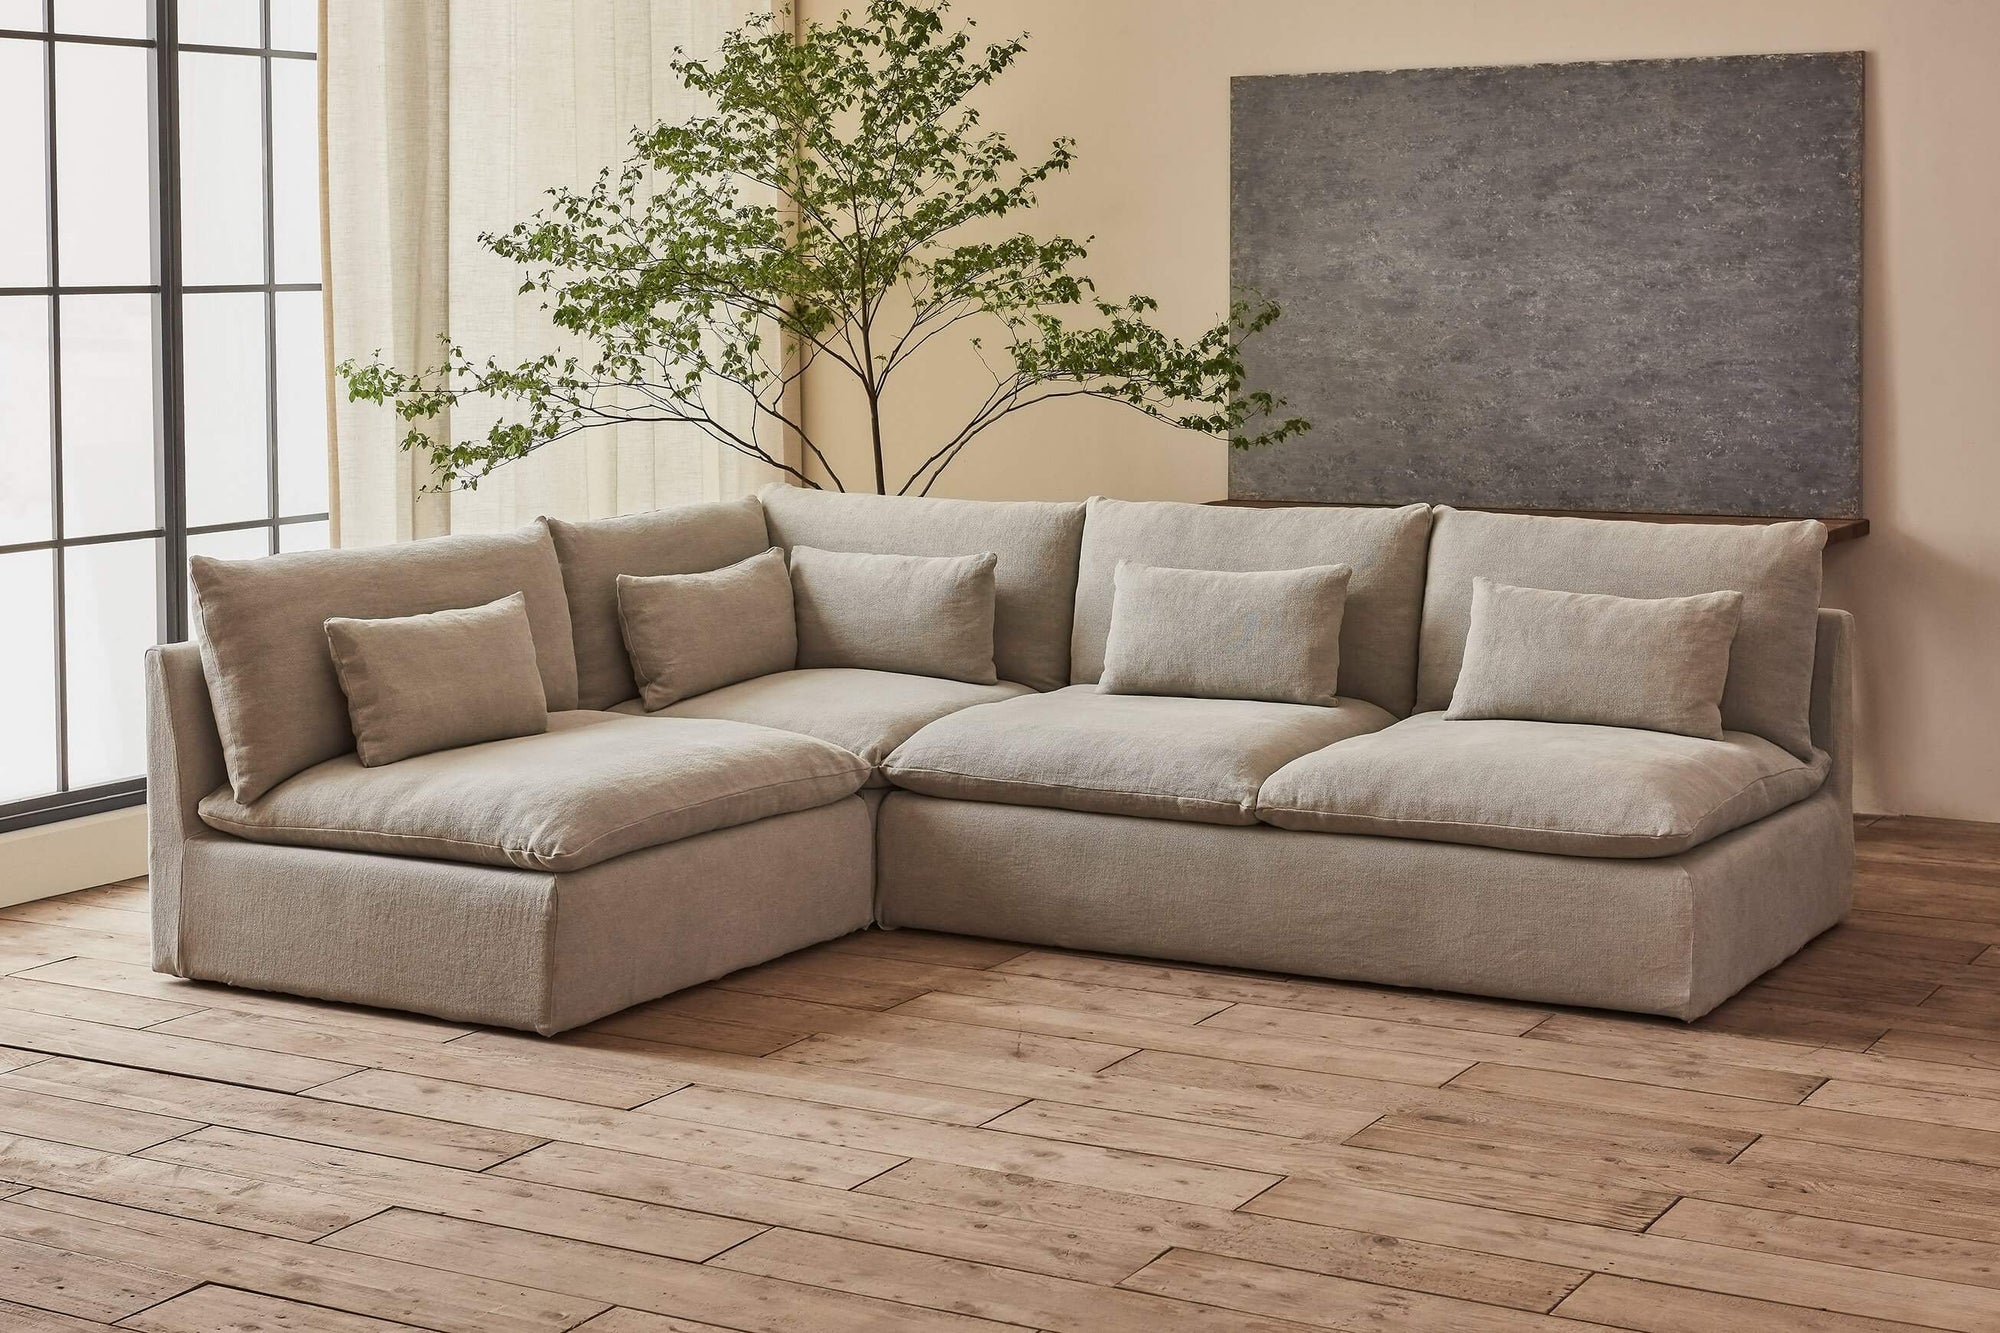 Aria Short L-Shape Sectional Sofa in Jasmine Rice, a light warm greige Medium Weight Linen, placed in a sunlit room with a large window and a stone wall hanging